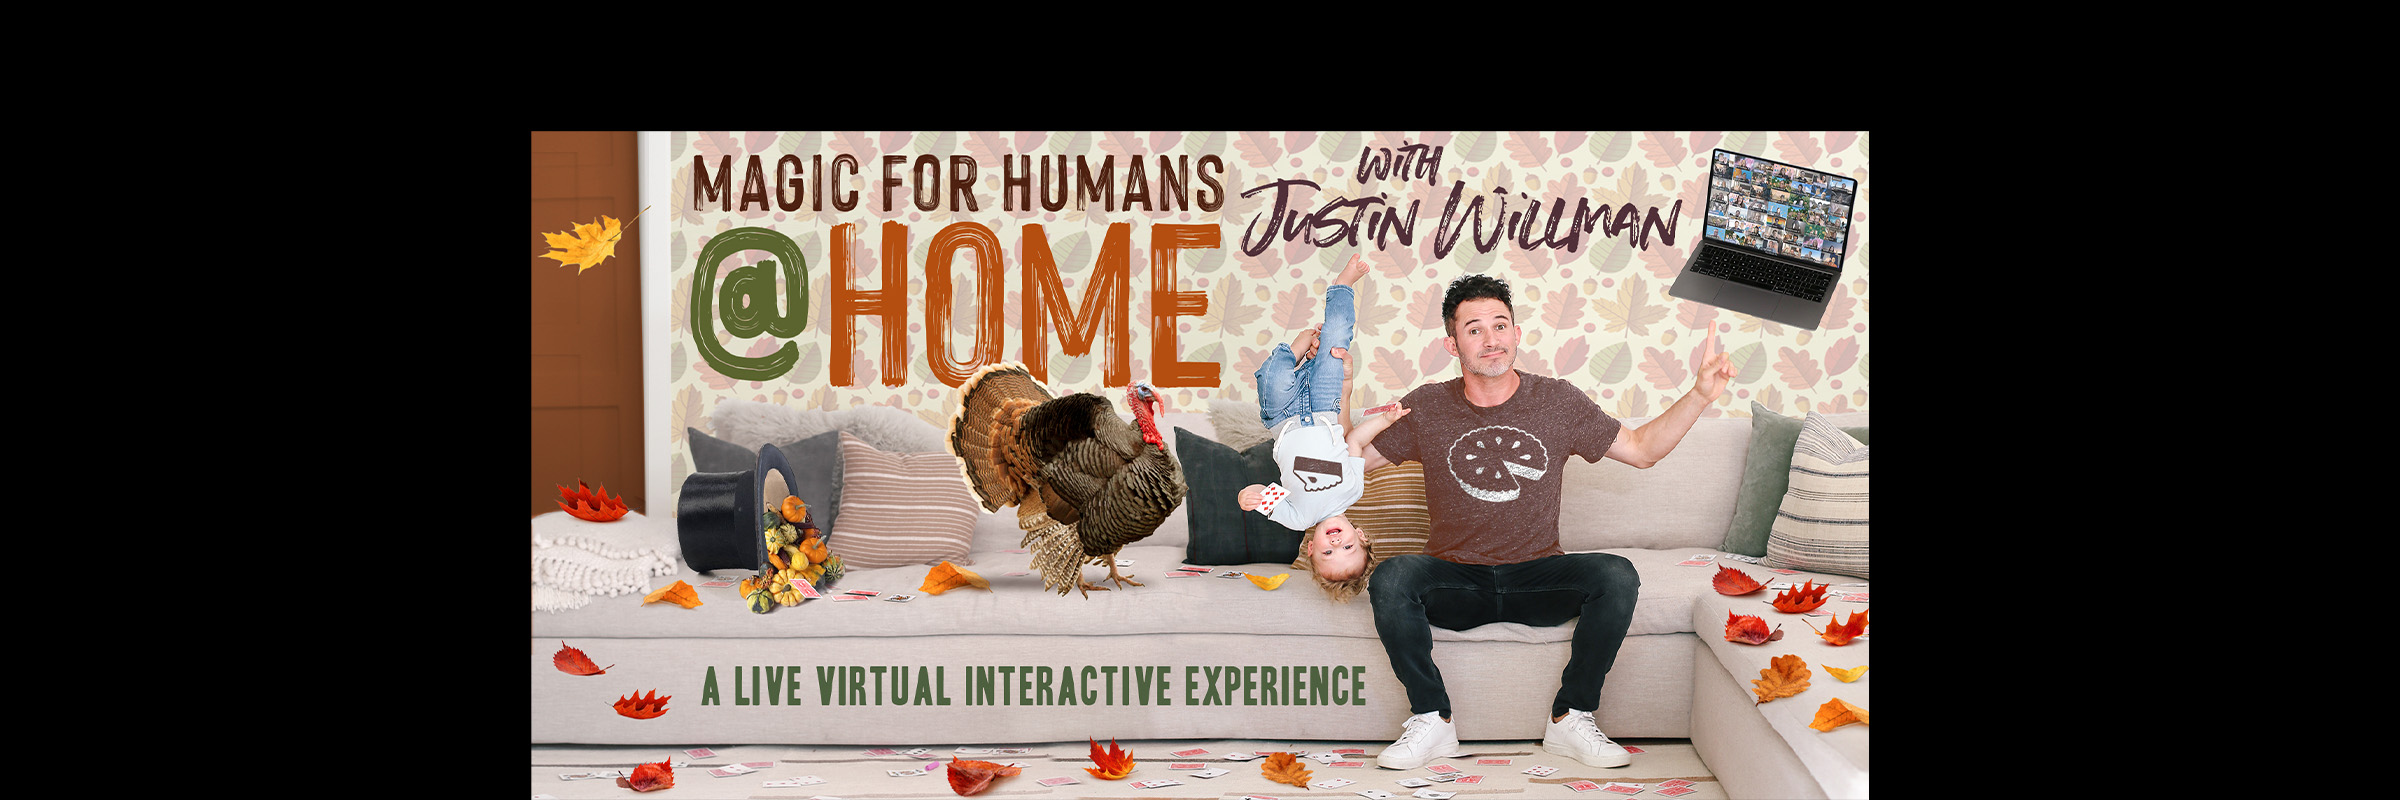 MAGIC FOR HUMANS (AT HOME) with Justin Willman